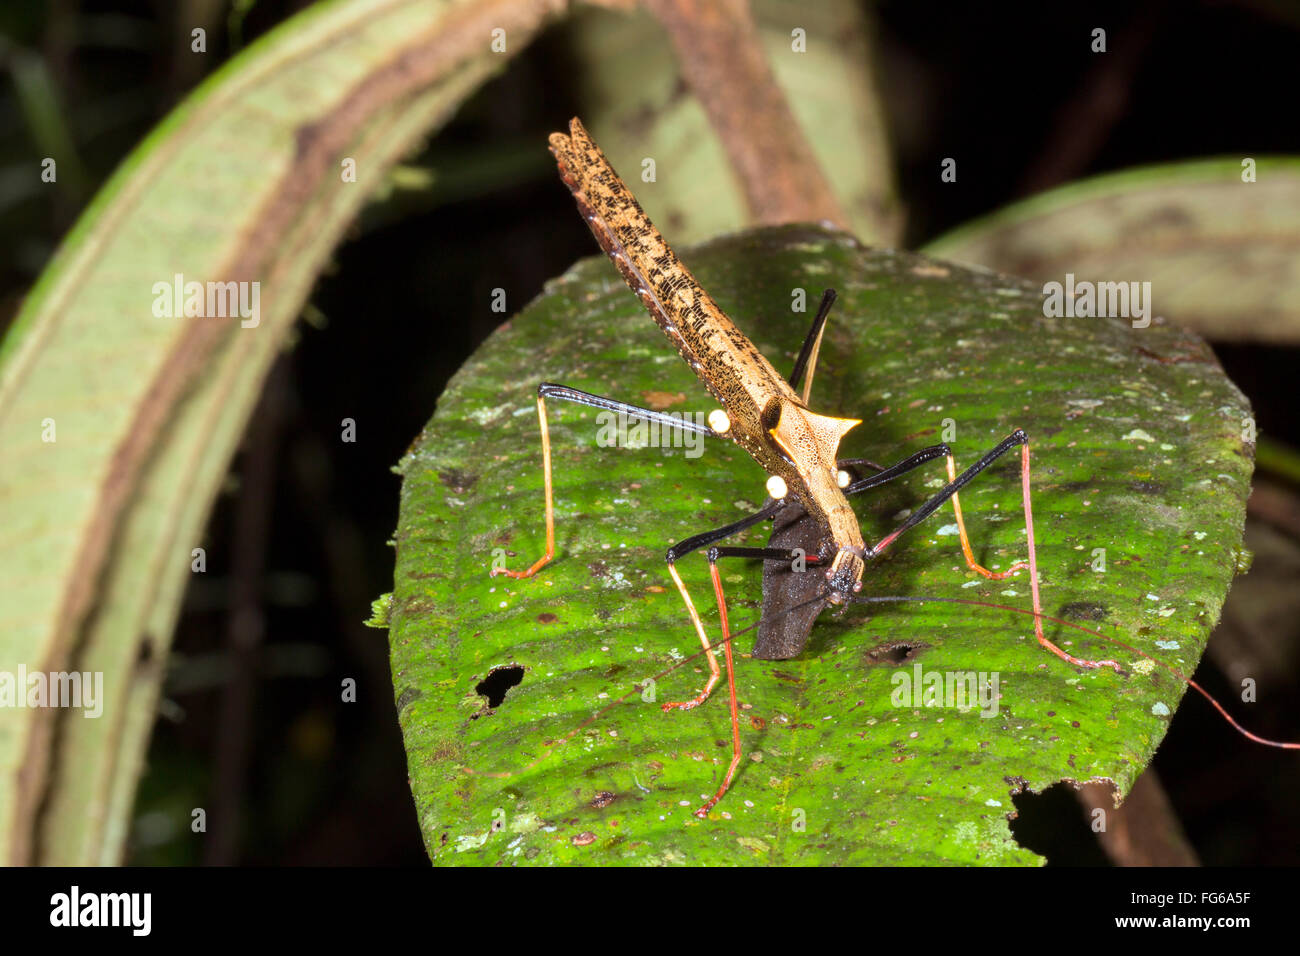 Amazonian stick insect (Pseudophasma bispinosa) with several attached dipteran ectoparasites. Stock Photo